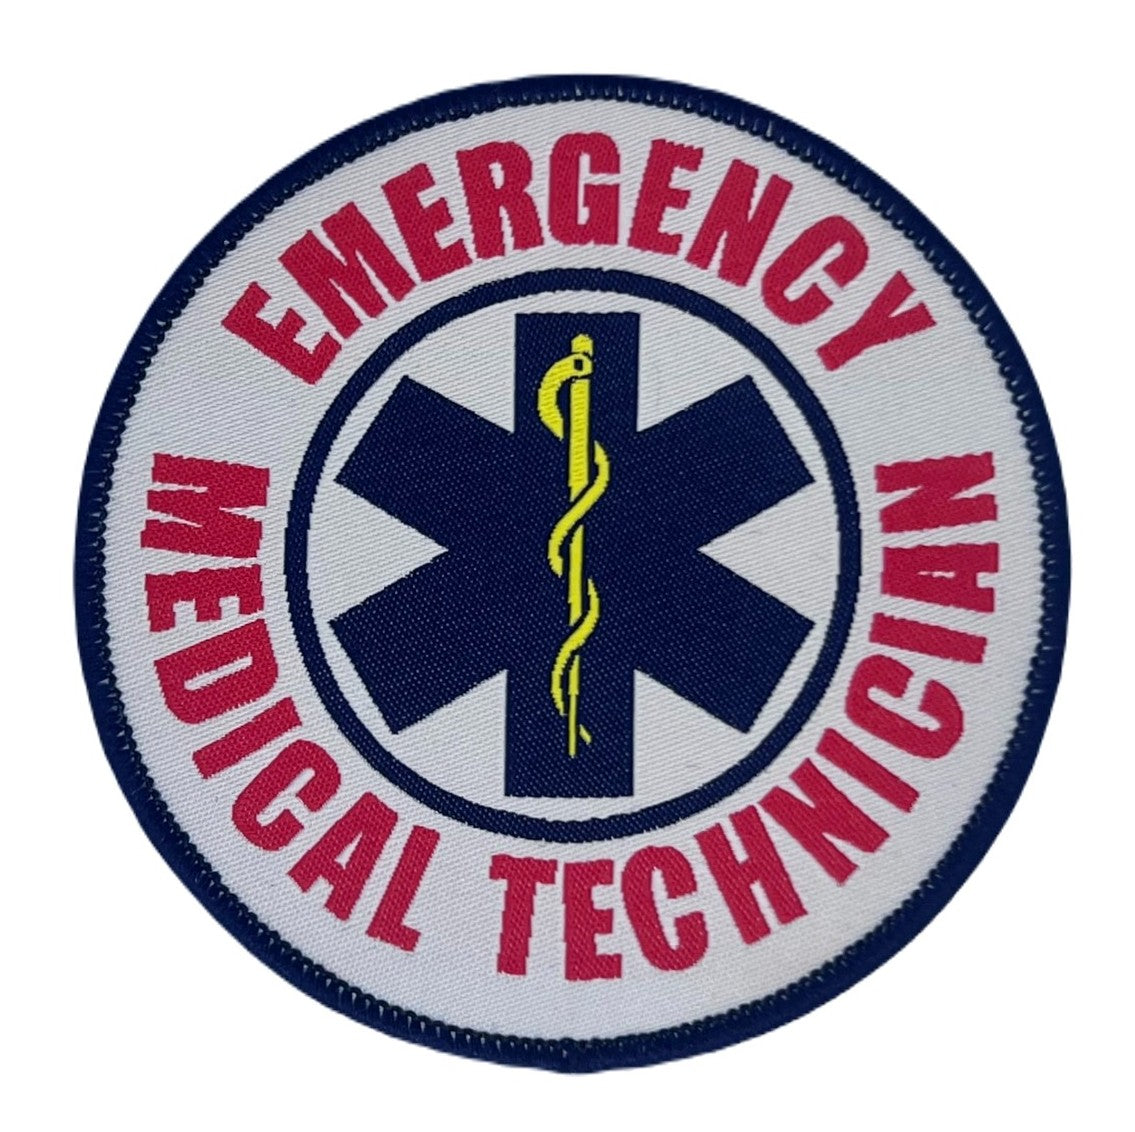 EMT Emergency Medical Technician Patch (3.5 Inch) Iron or Sew-on